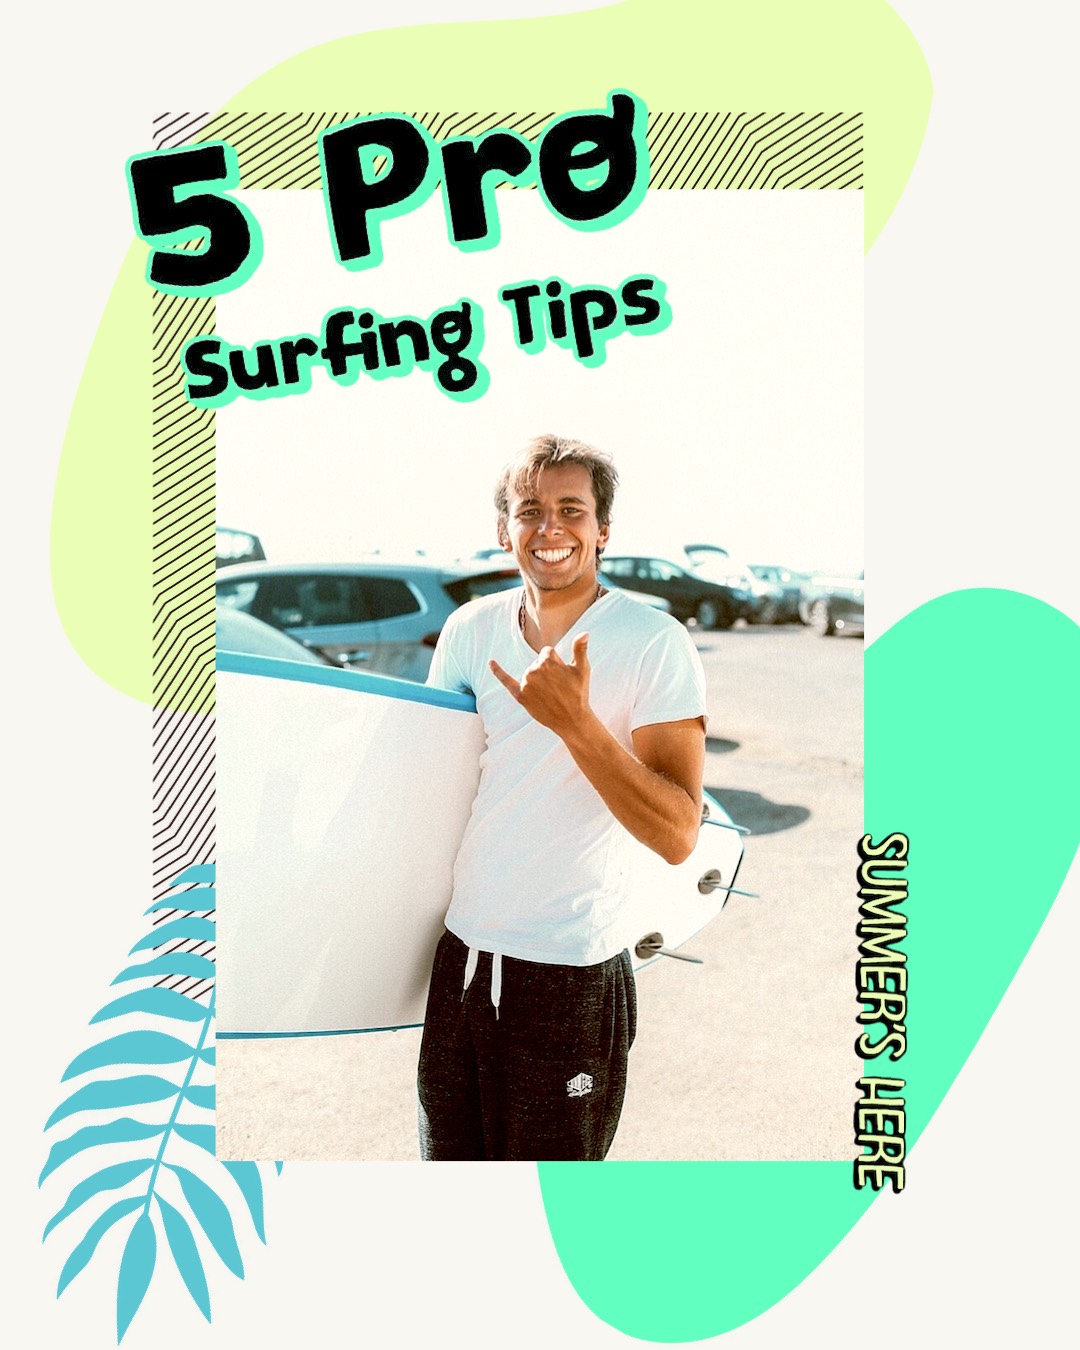 5 Pro Surfing Tips Smile Retro Summer Template